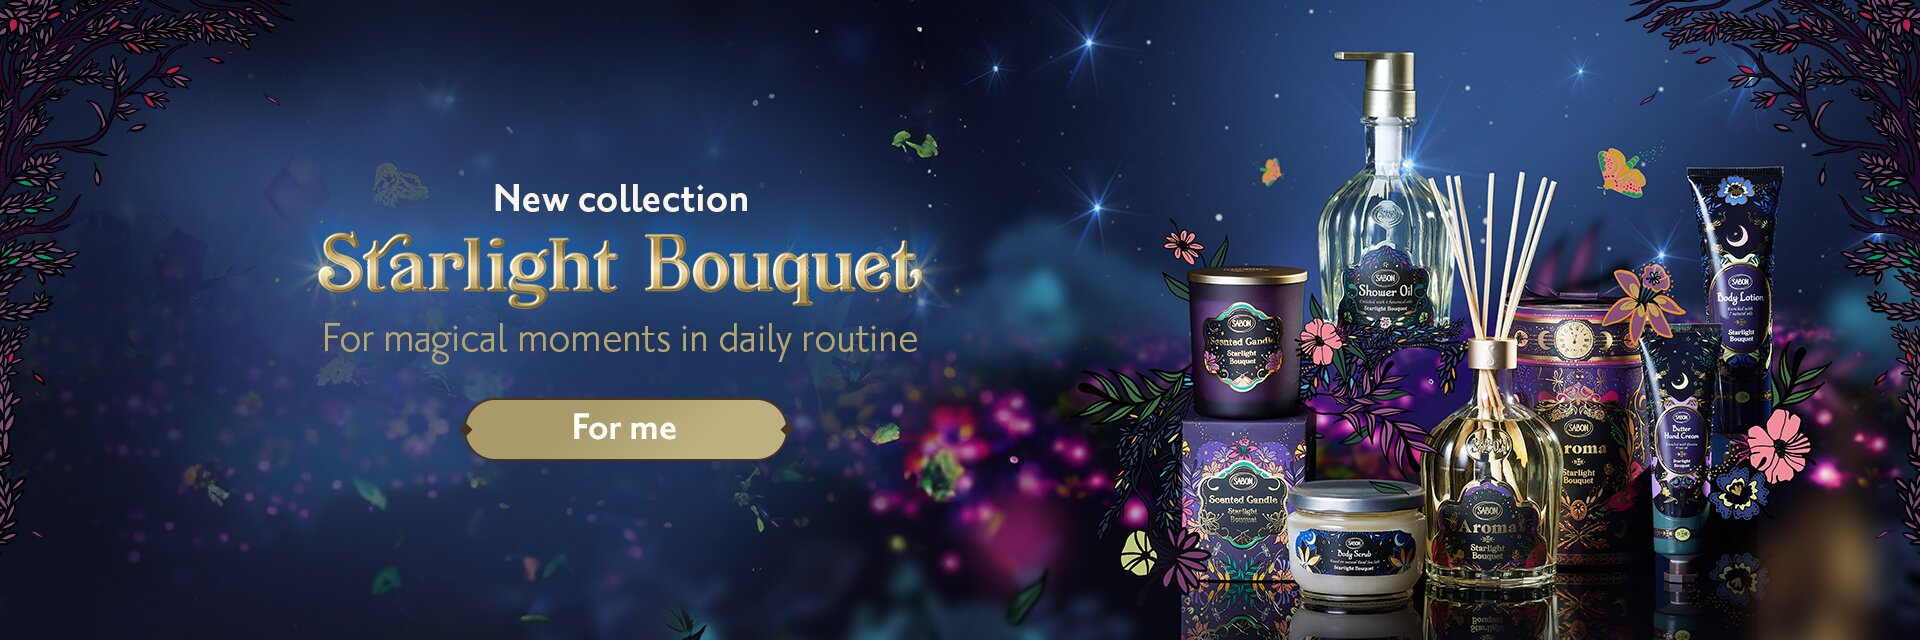 New Collection - STARLIGHT BOUQUET. Beyond the collection page: 